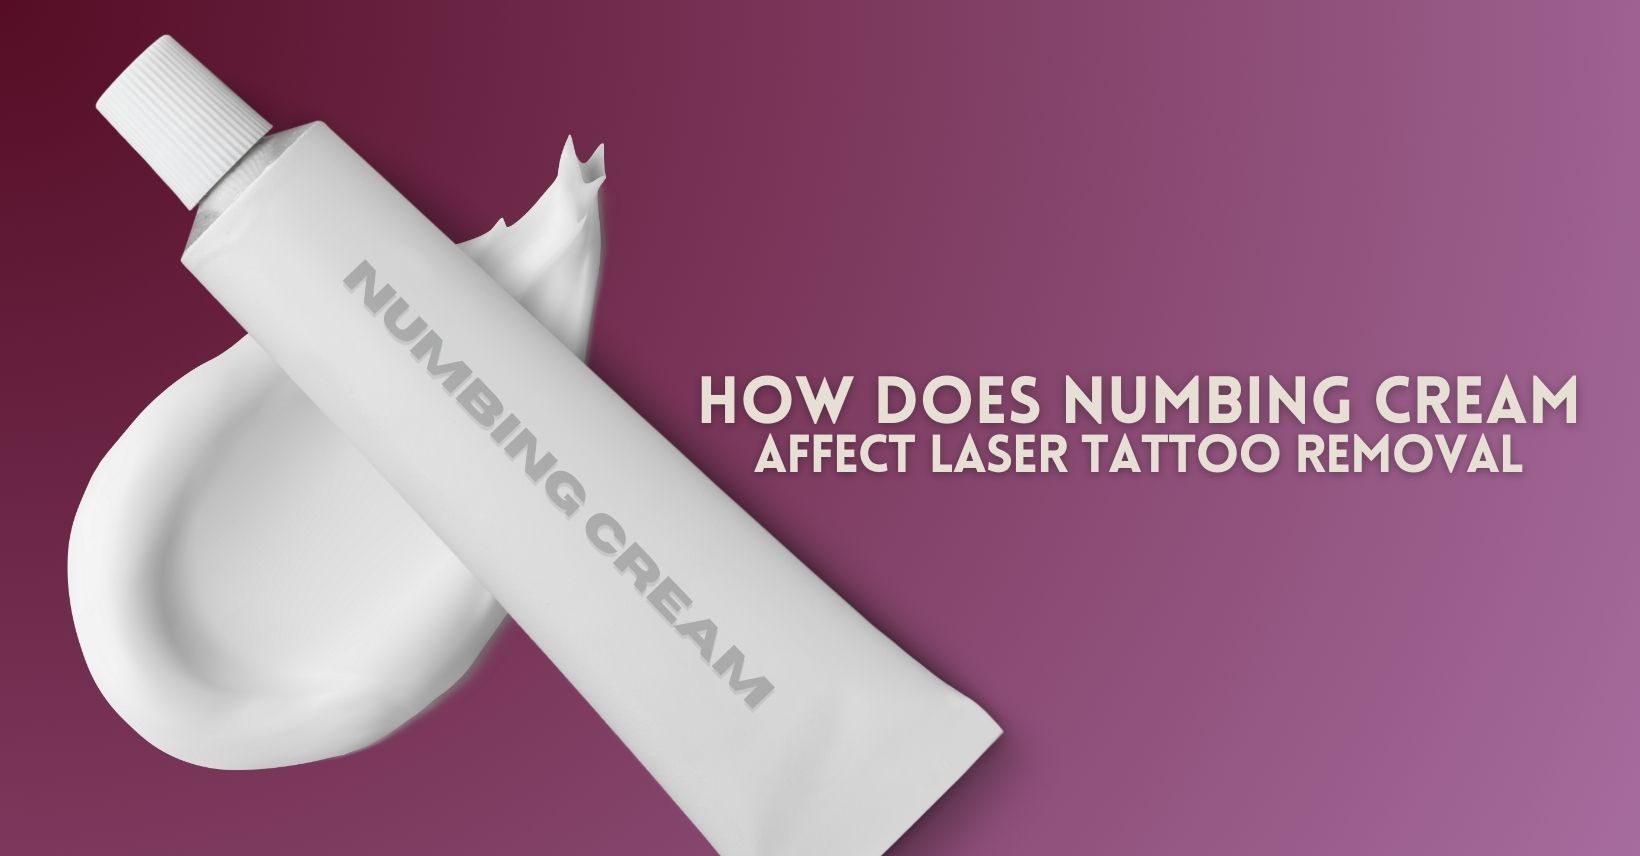 How Does Numbing Cream Affect Laser Tattoo Removal